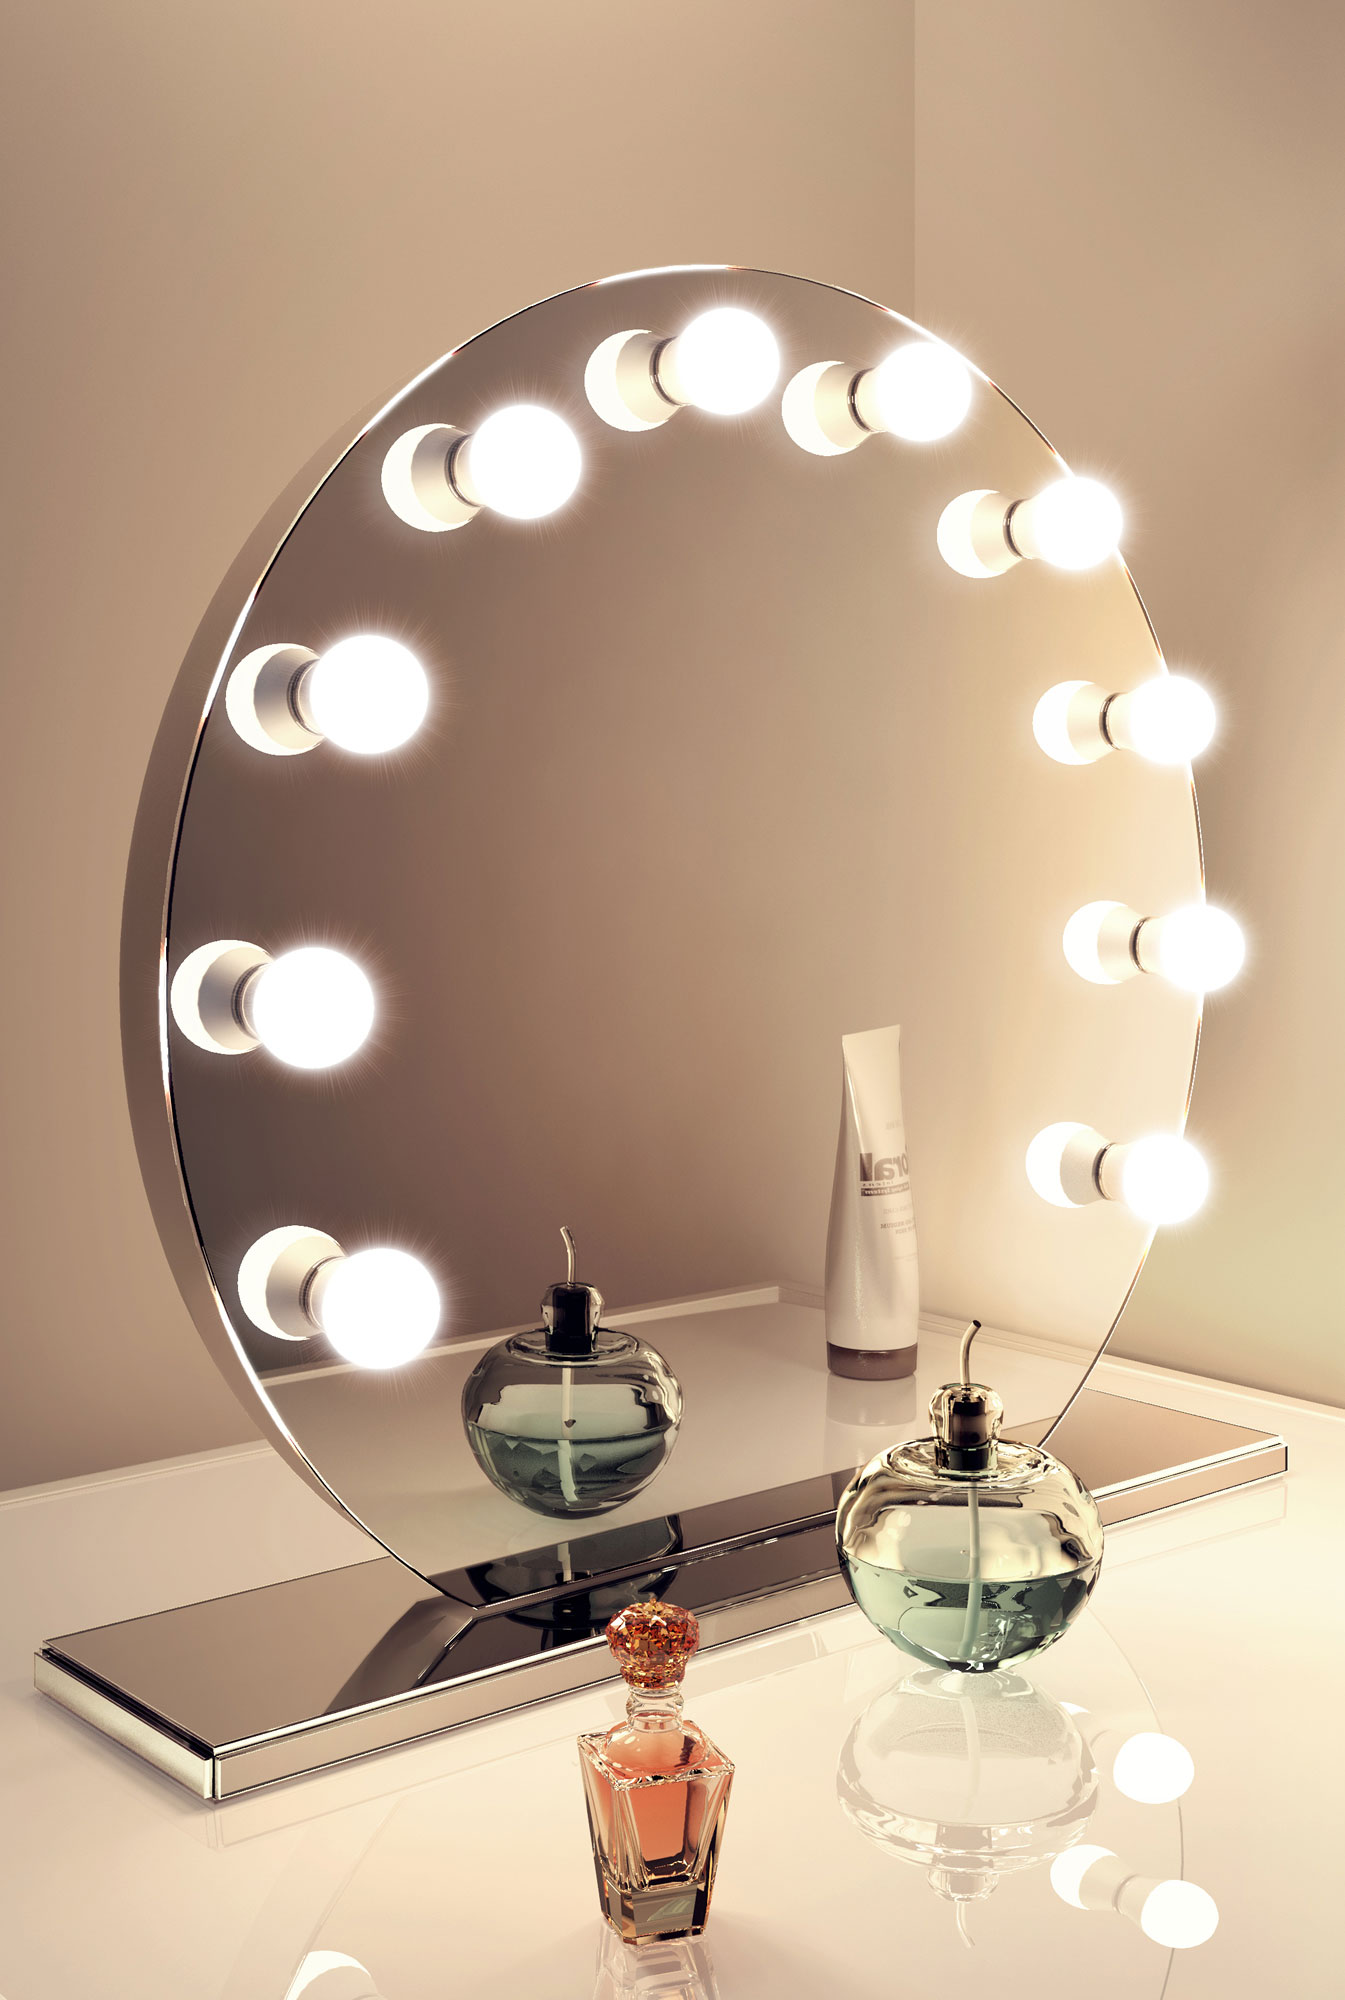 Mirror Finish Hollywood Makeup Mirror with Dimmable lamps k251 | eBay